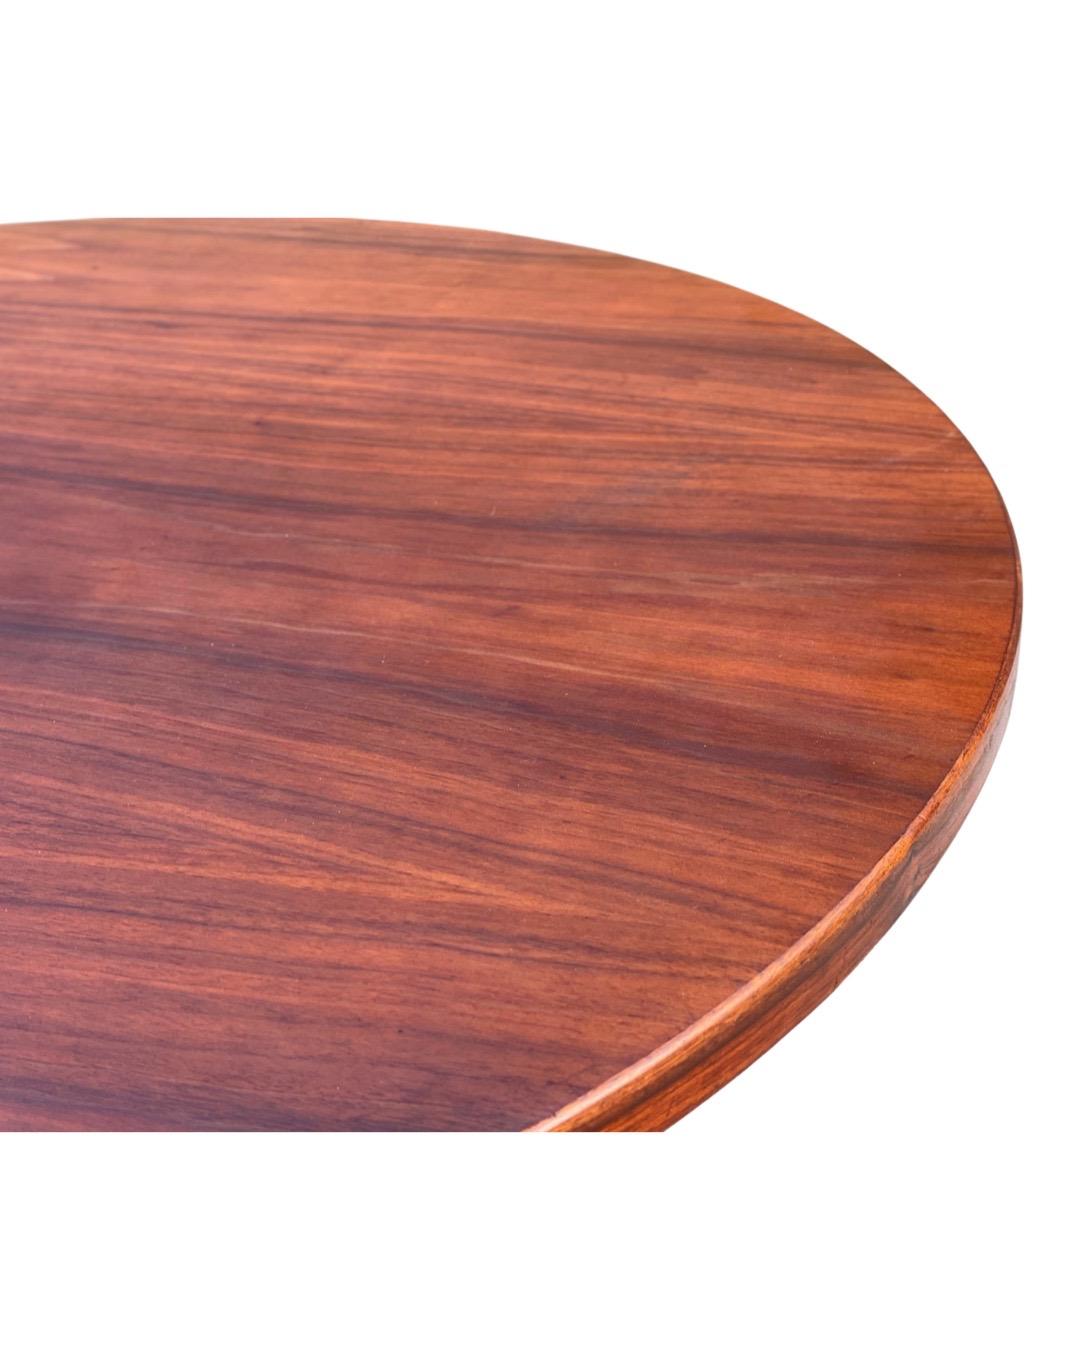 Mid-Century Modern Midcentury Round Coffee Table by Jens Risom in Walnut, Rotating Lazy Susan